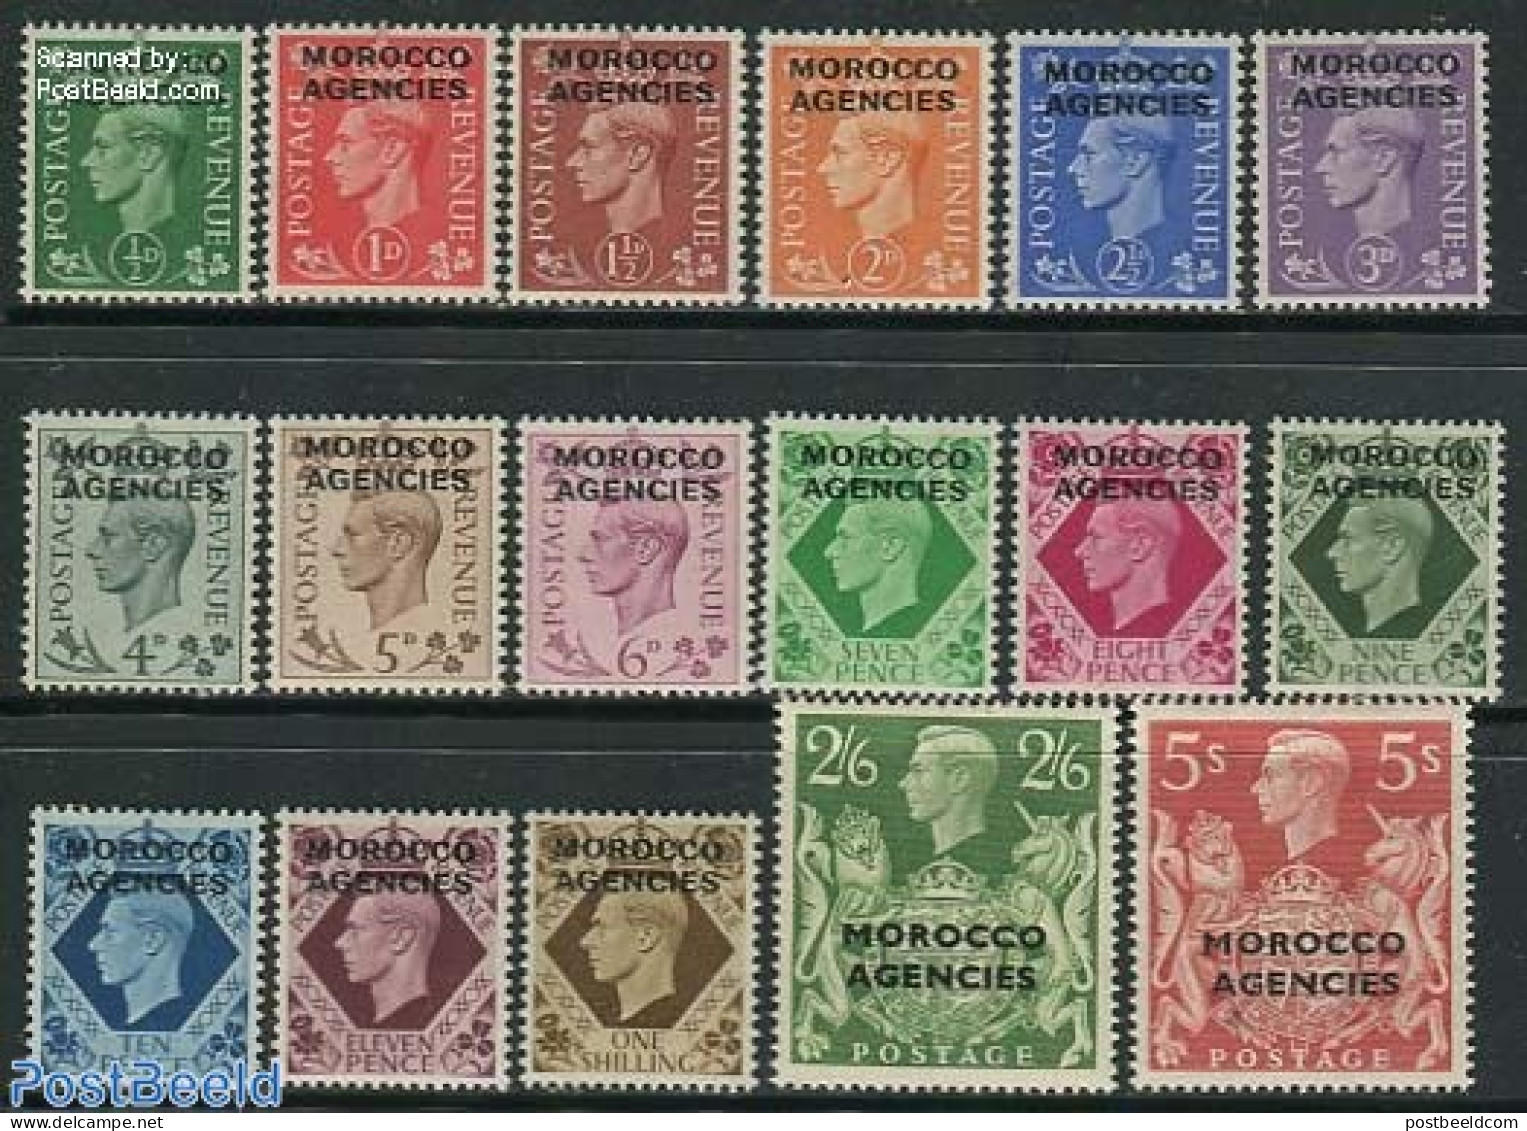 Great Britain 1949 Morocco Agencies 17v, Mint NH - Unused Stamps